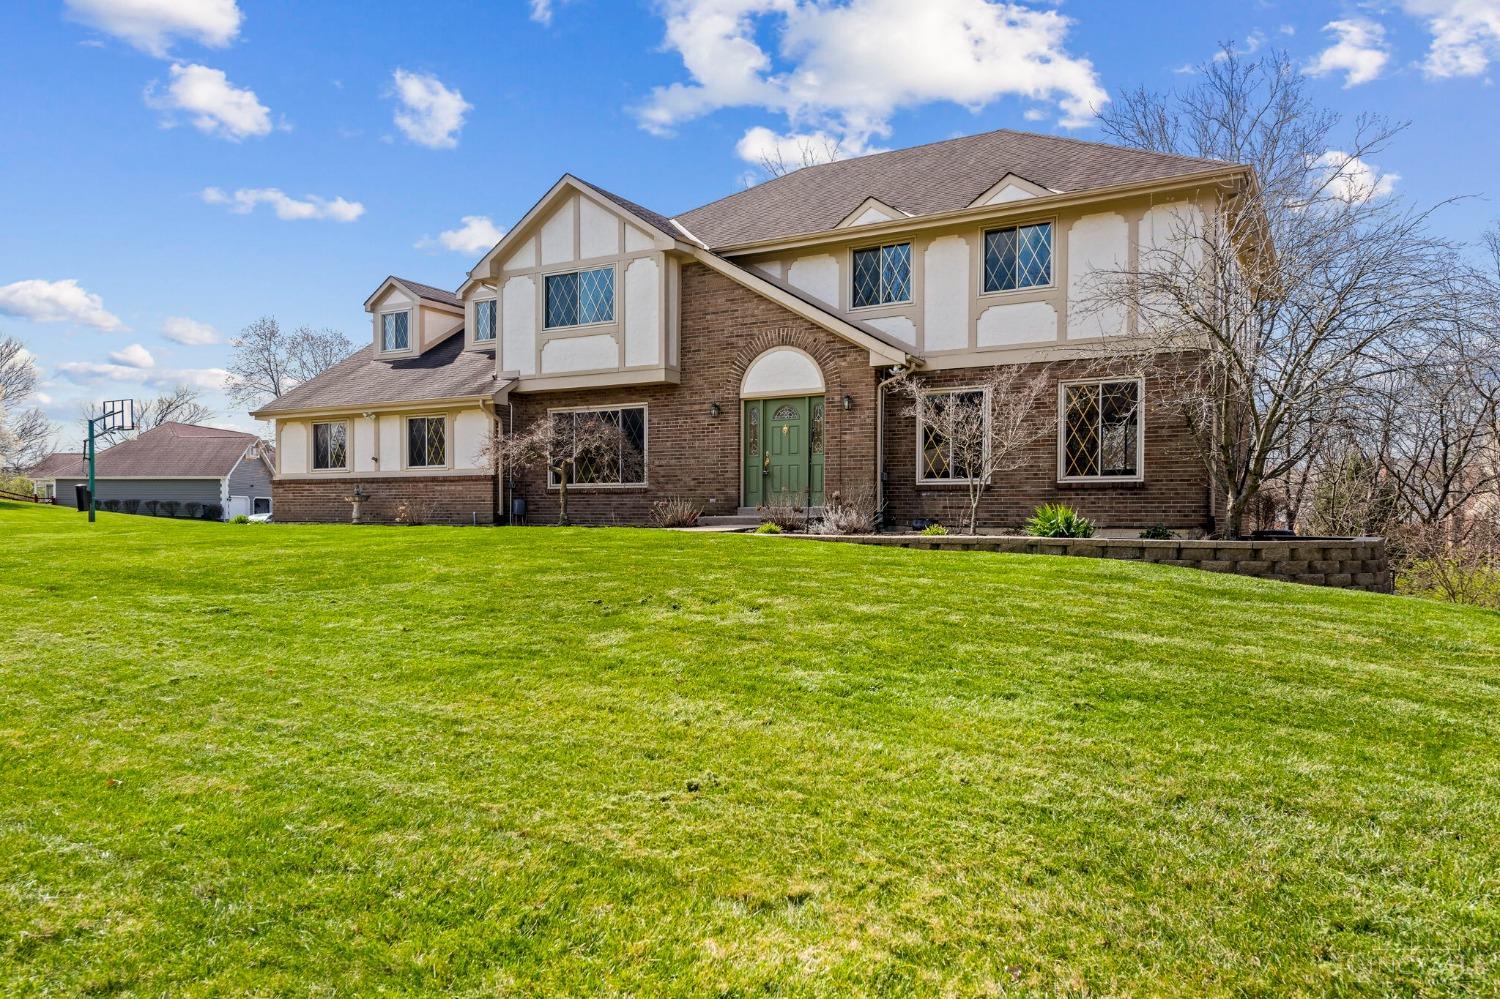 8325 Toddcreek Cir, West Chester, OH 